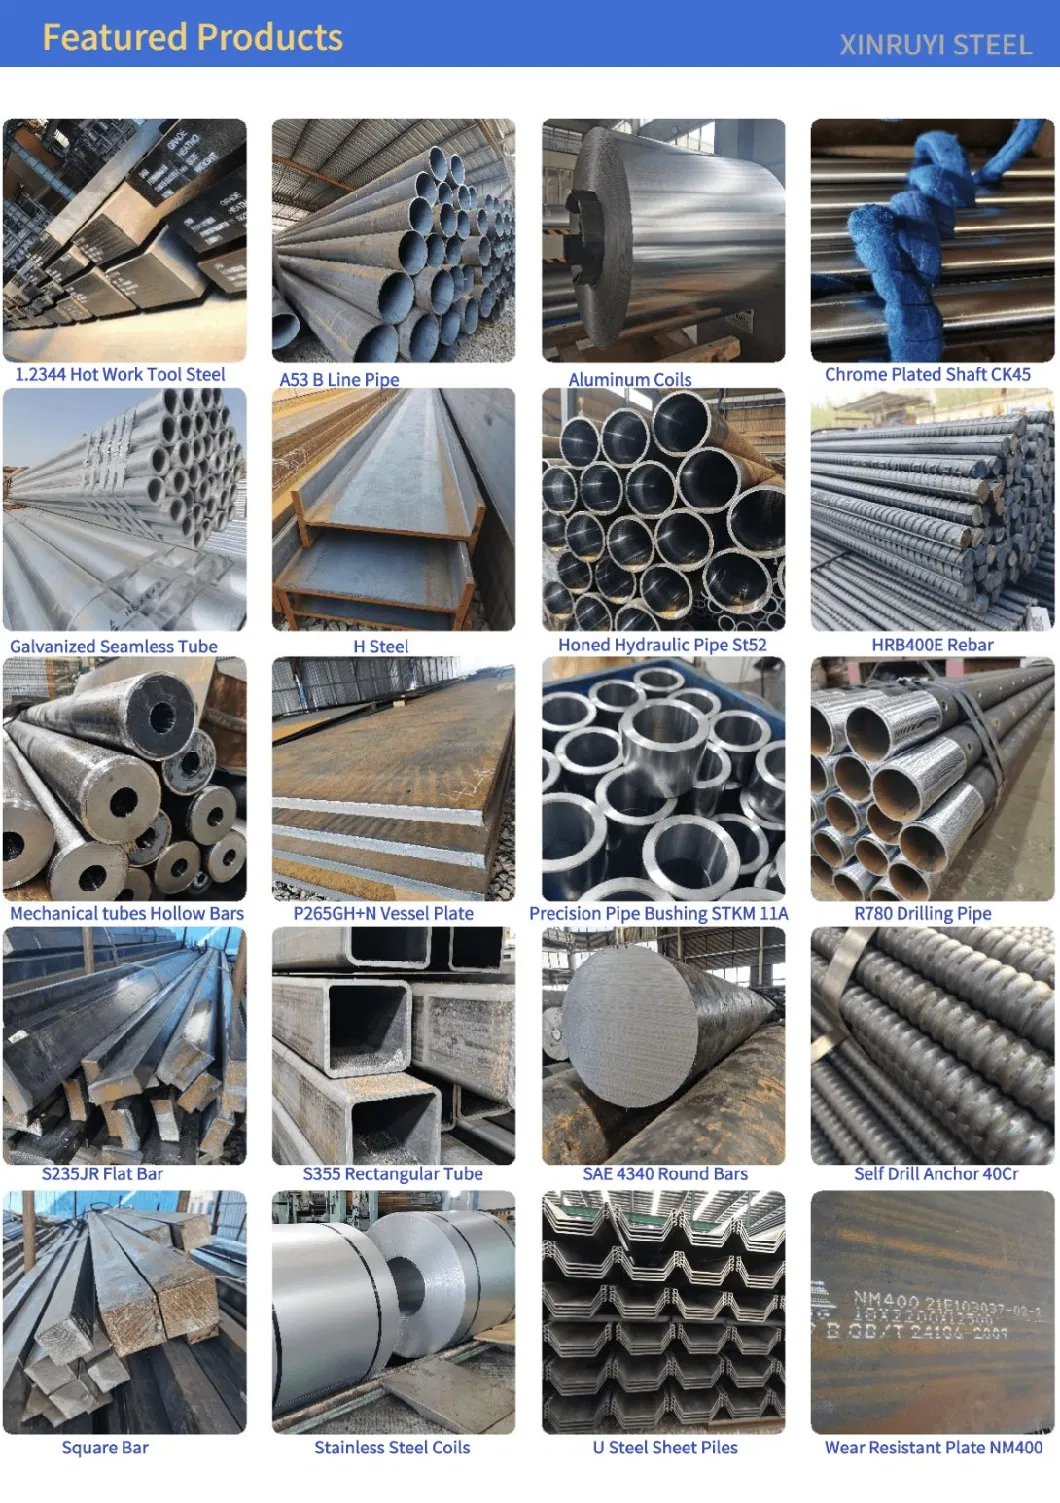 ASTM A335 P91 P11 P12 P22 Seamless Alloy Steel Pipe